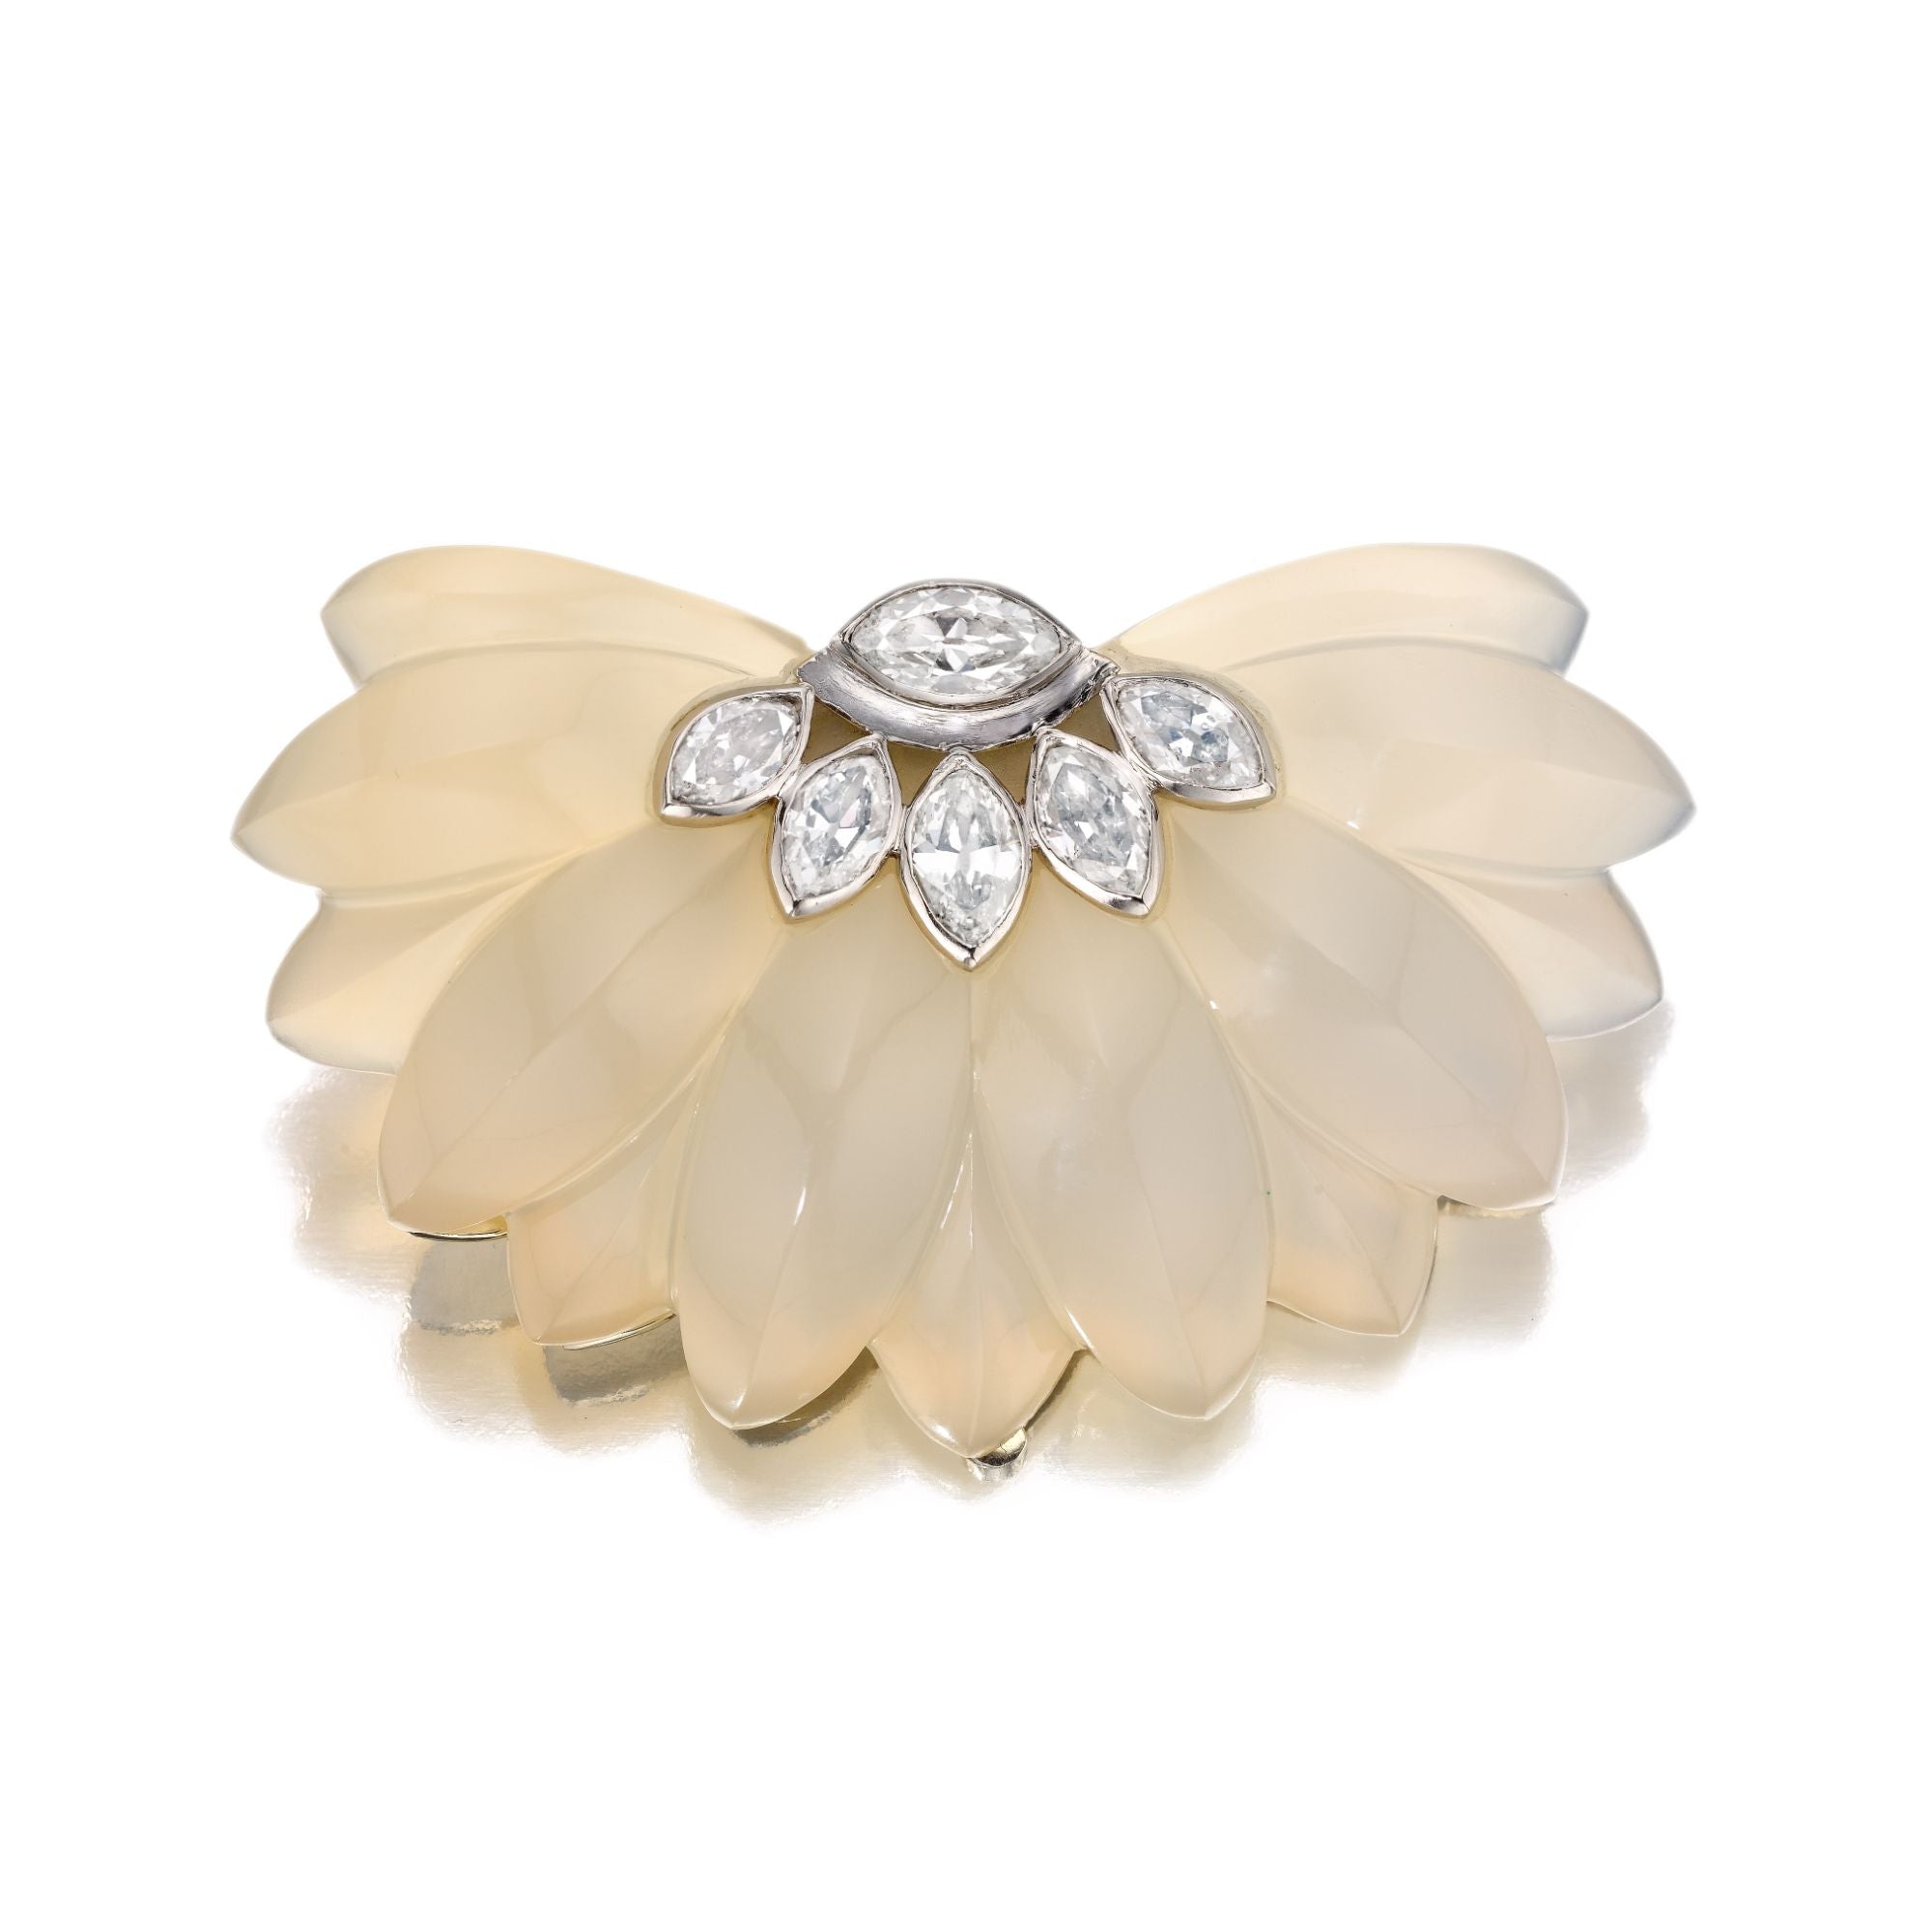 ART MODERNE CHALCEDONY AND DIAMOND DEMI-MARGUERITE BROOCH BY